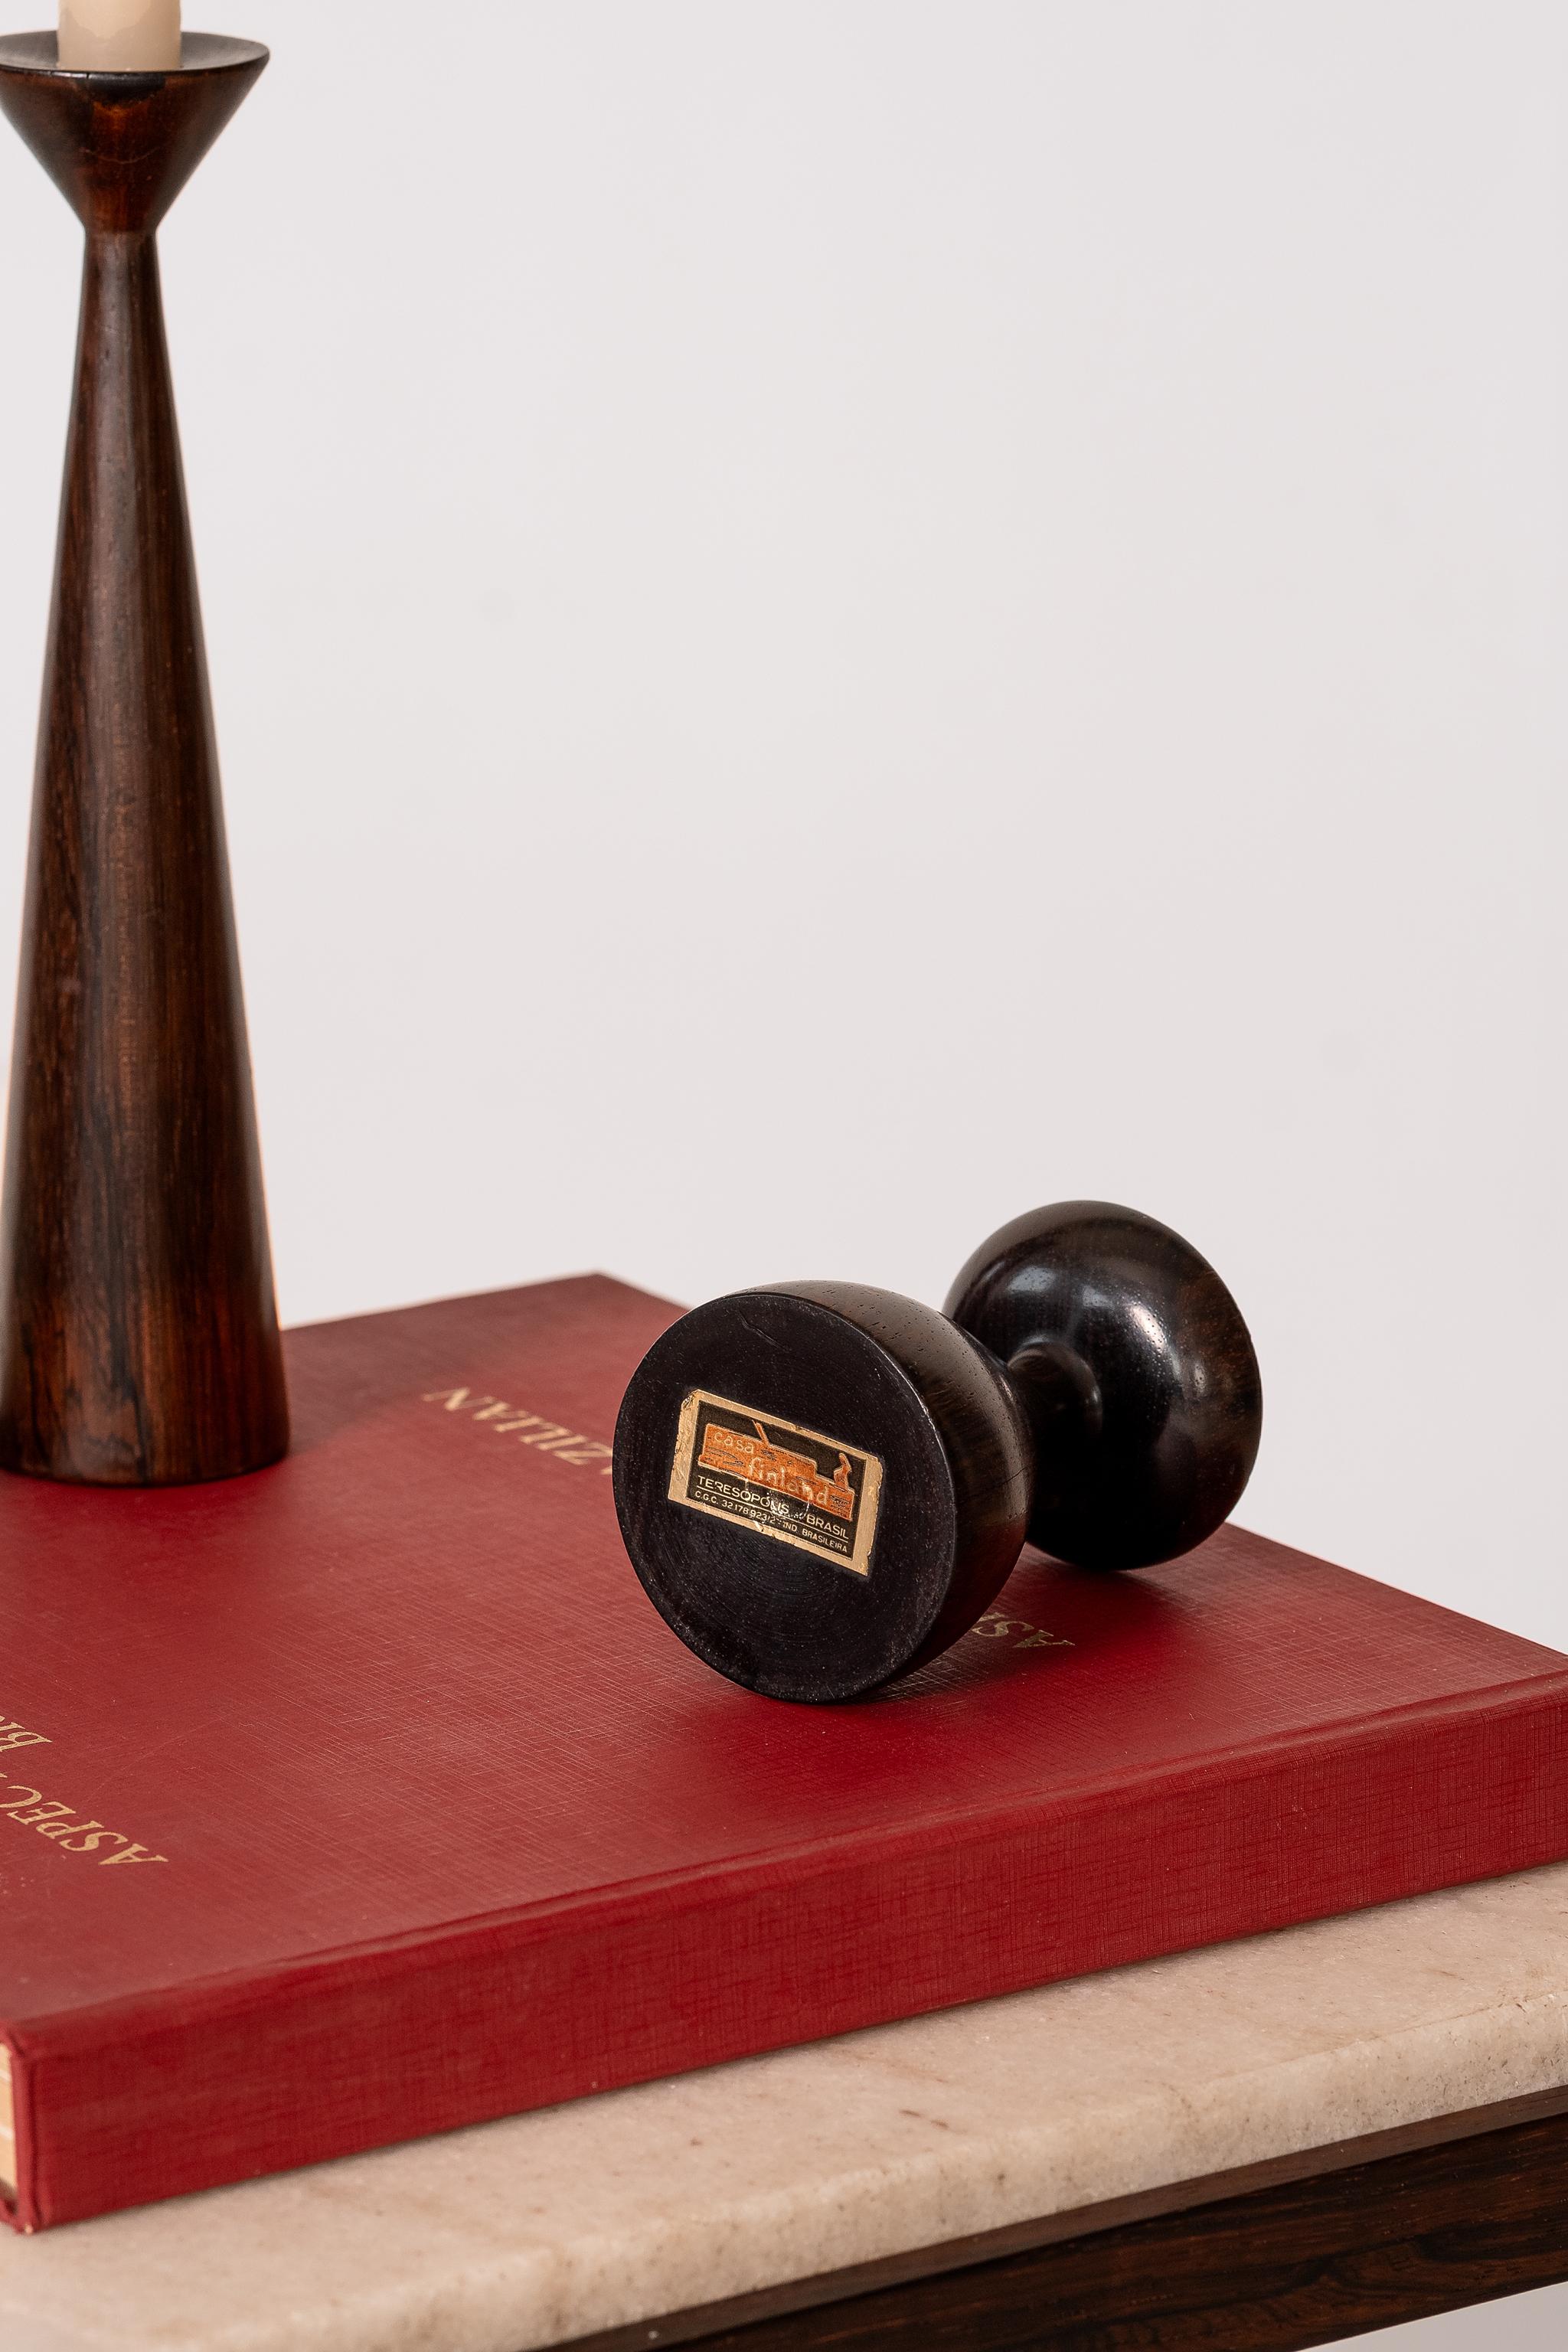 Brazilian Midcentury Candlestick in Rosewood by Casa Finland, c. 1970 In Good Condition For Sale In Rio De Janeiro, RJ